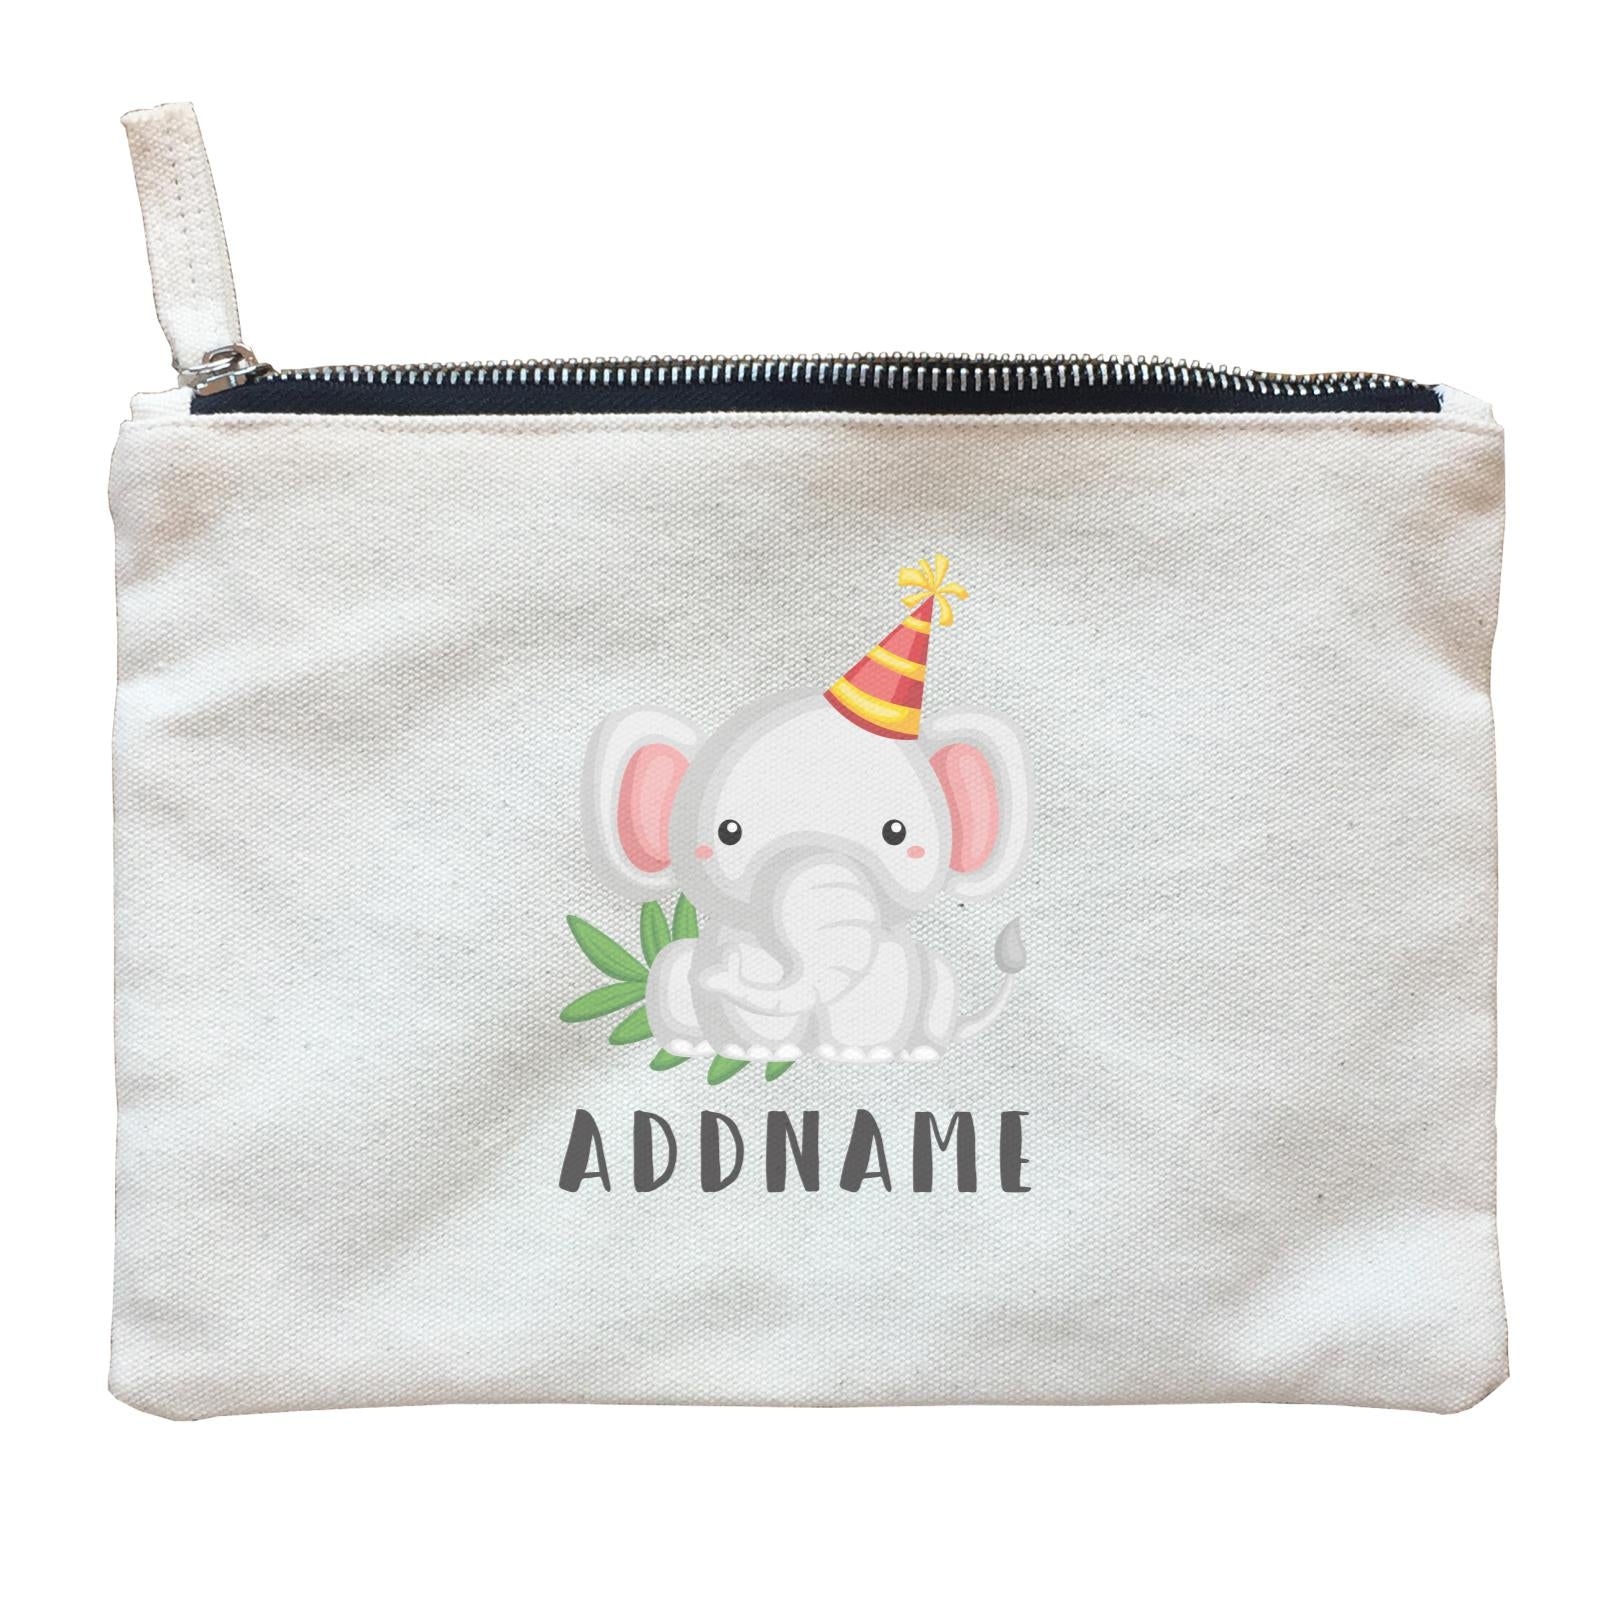 Birthday Safari Elephant Wearing Party Hat Addname Zipper Pouch